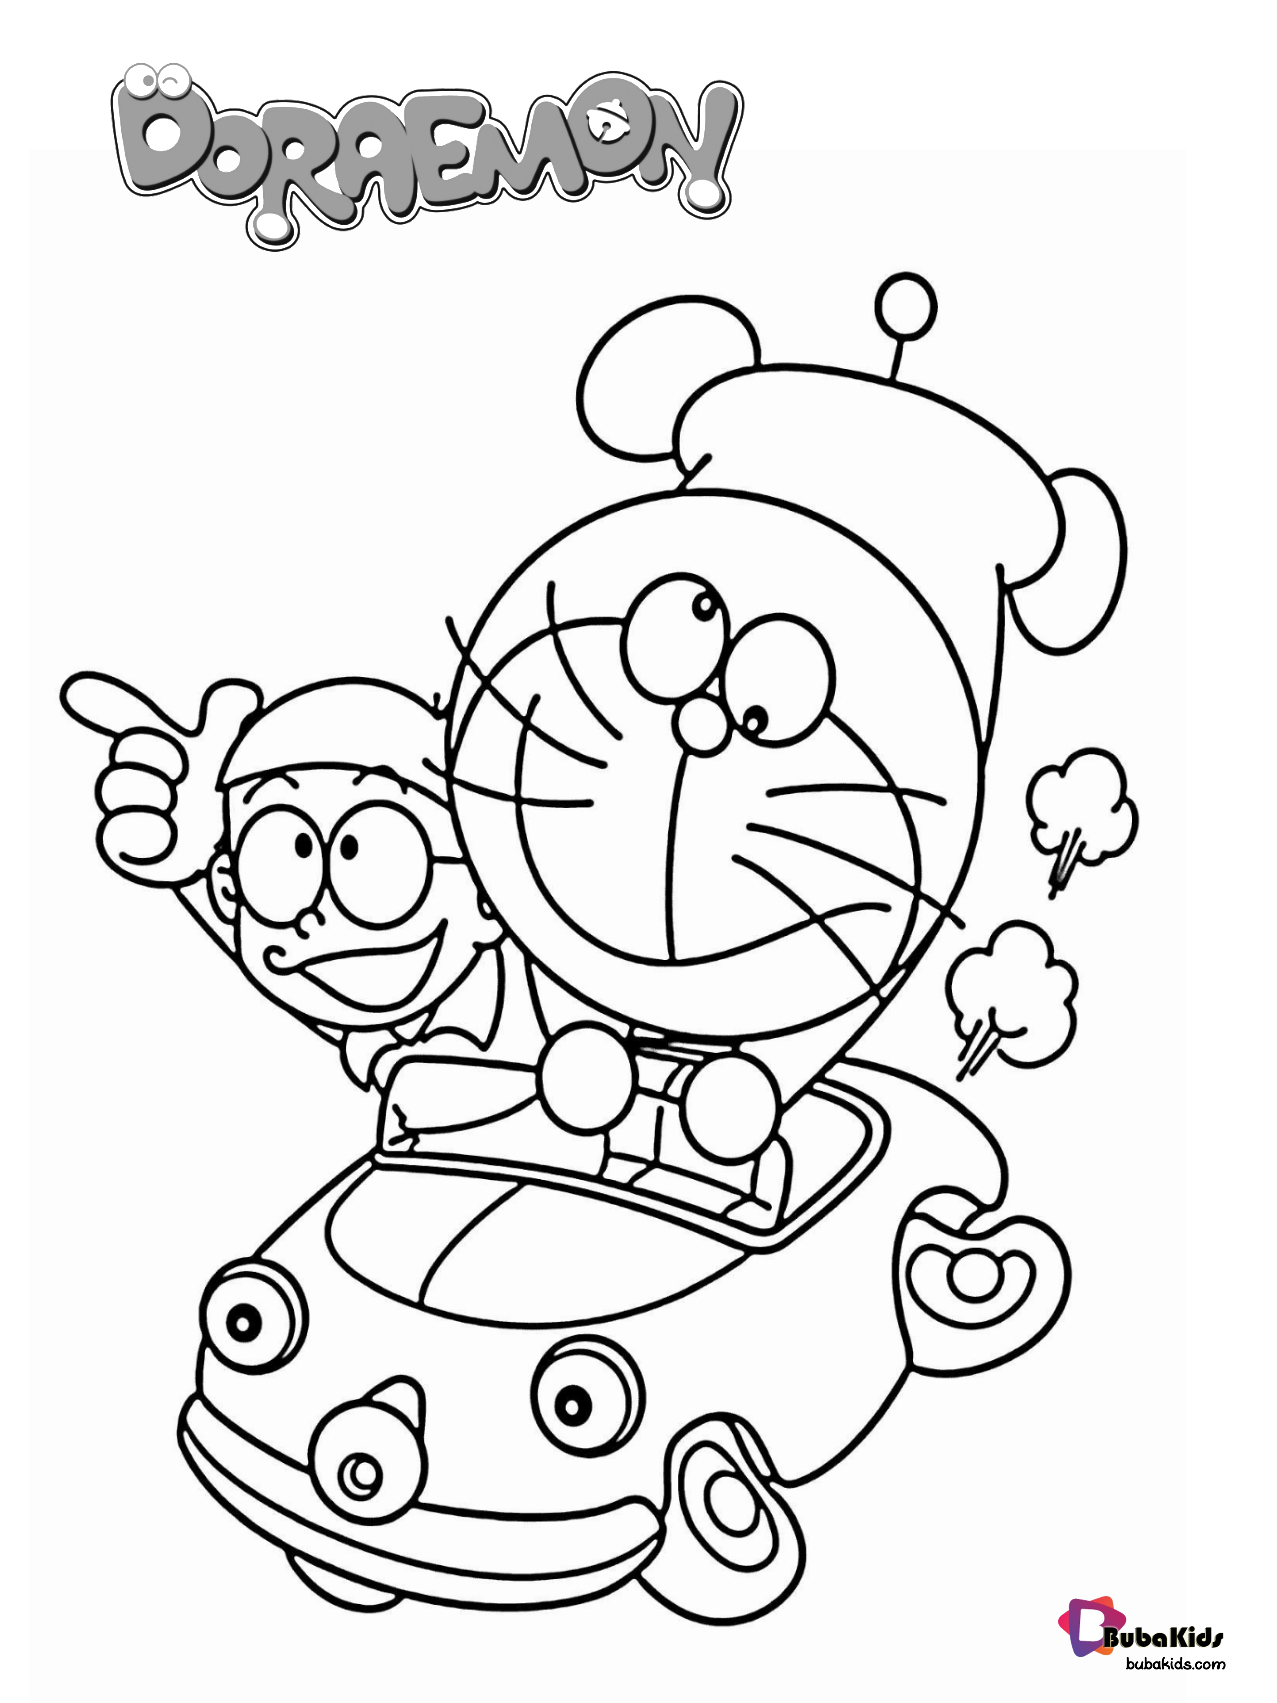 Free download and printable Doraemon and nobita coloring page. Wallpaper